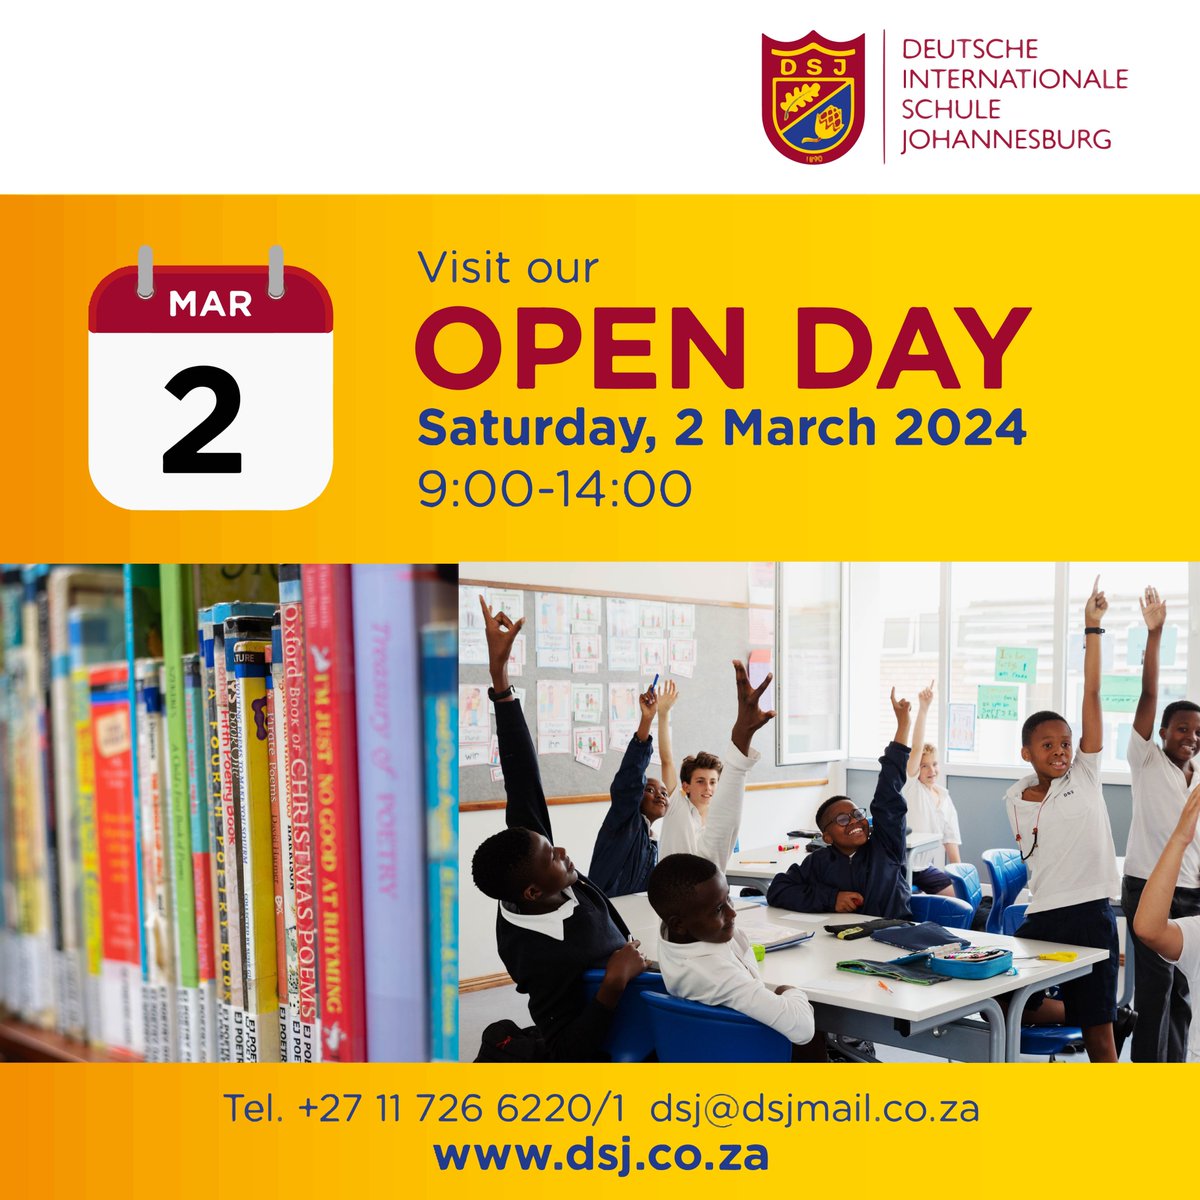 We look forward to welcoming you to our Open Day on Saturday, 02 March 2024 from 09h00 - 14h00. Come and experience a 'Day in the life of the DSJ'. #EinsatzDSJ #strongertogether